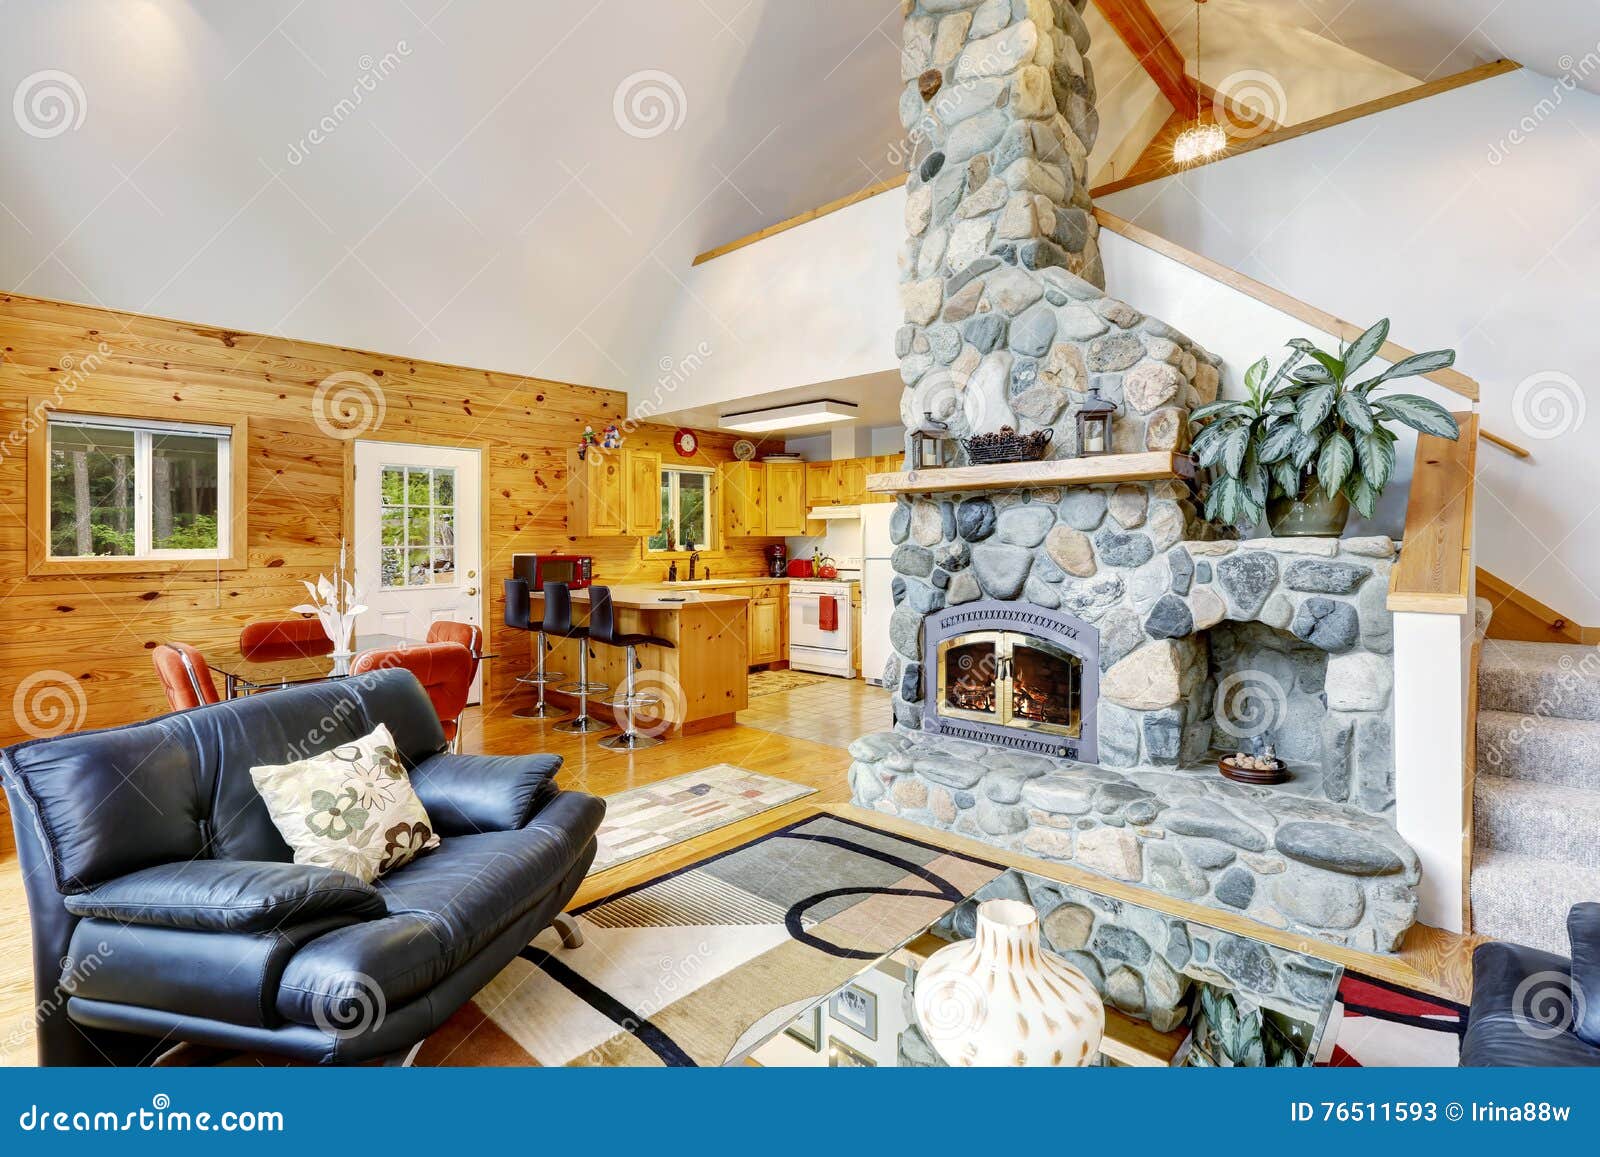 House Interior With Vaulted Ceiling And Open Floor Plan Stock